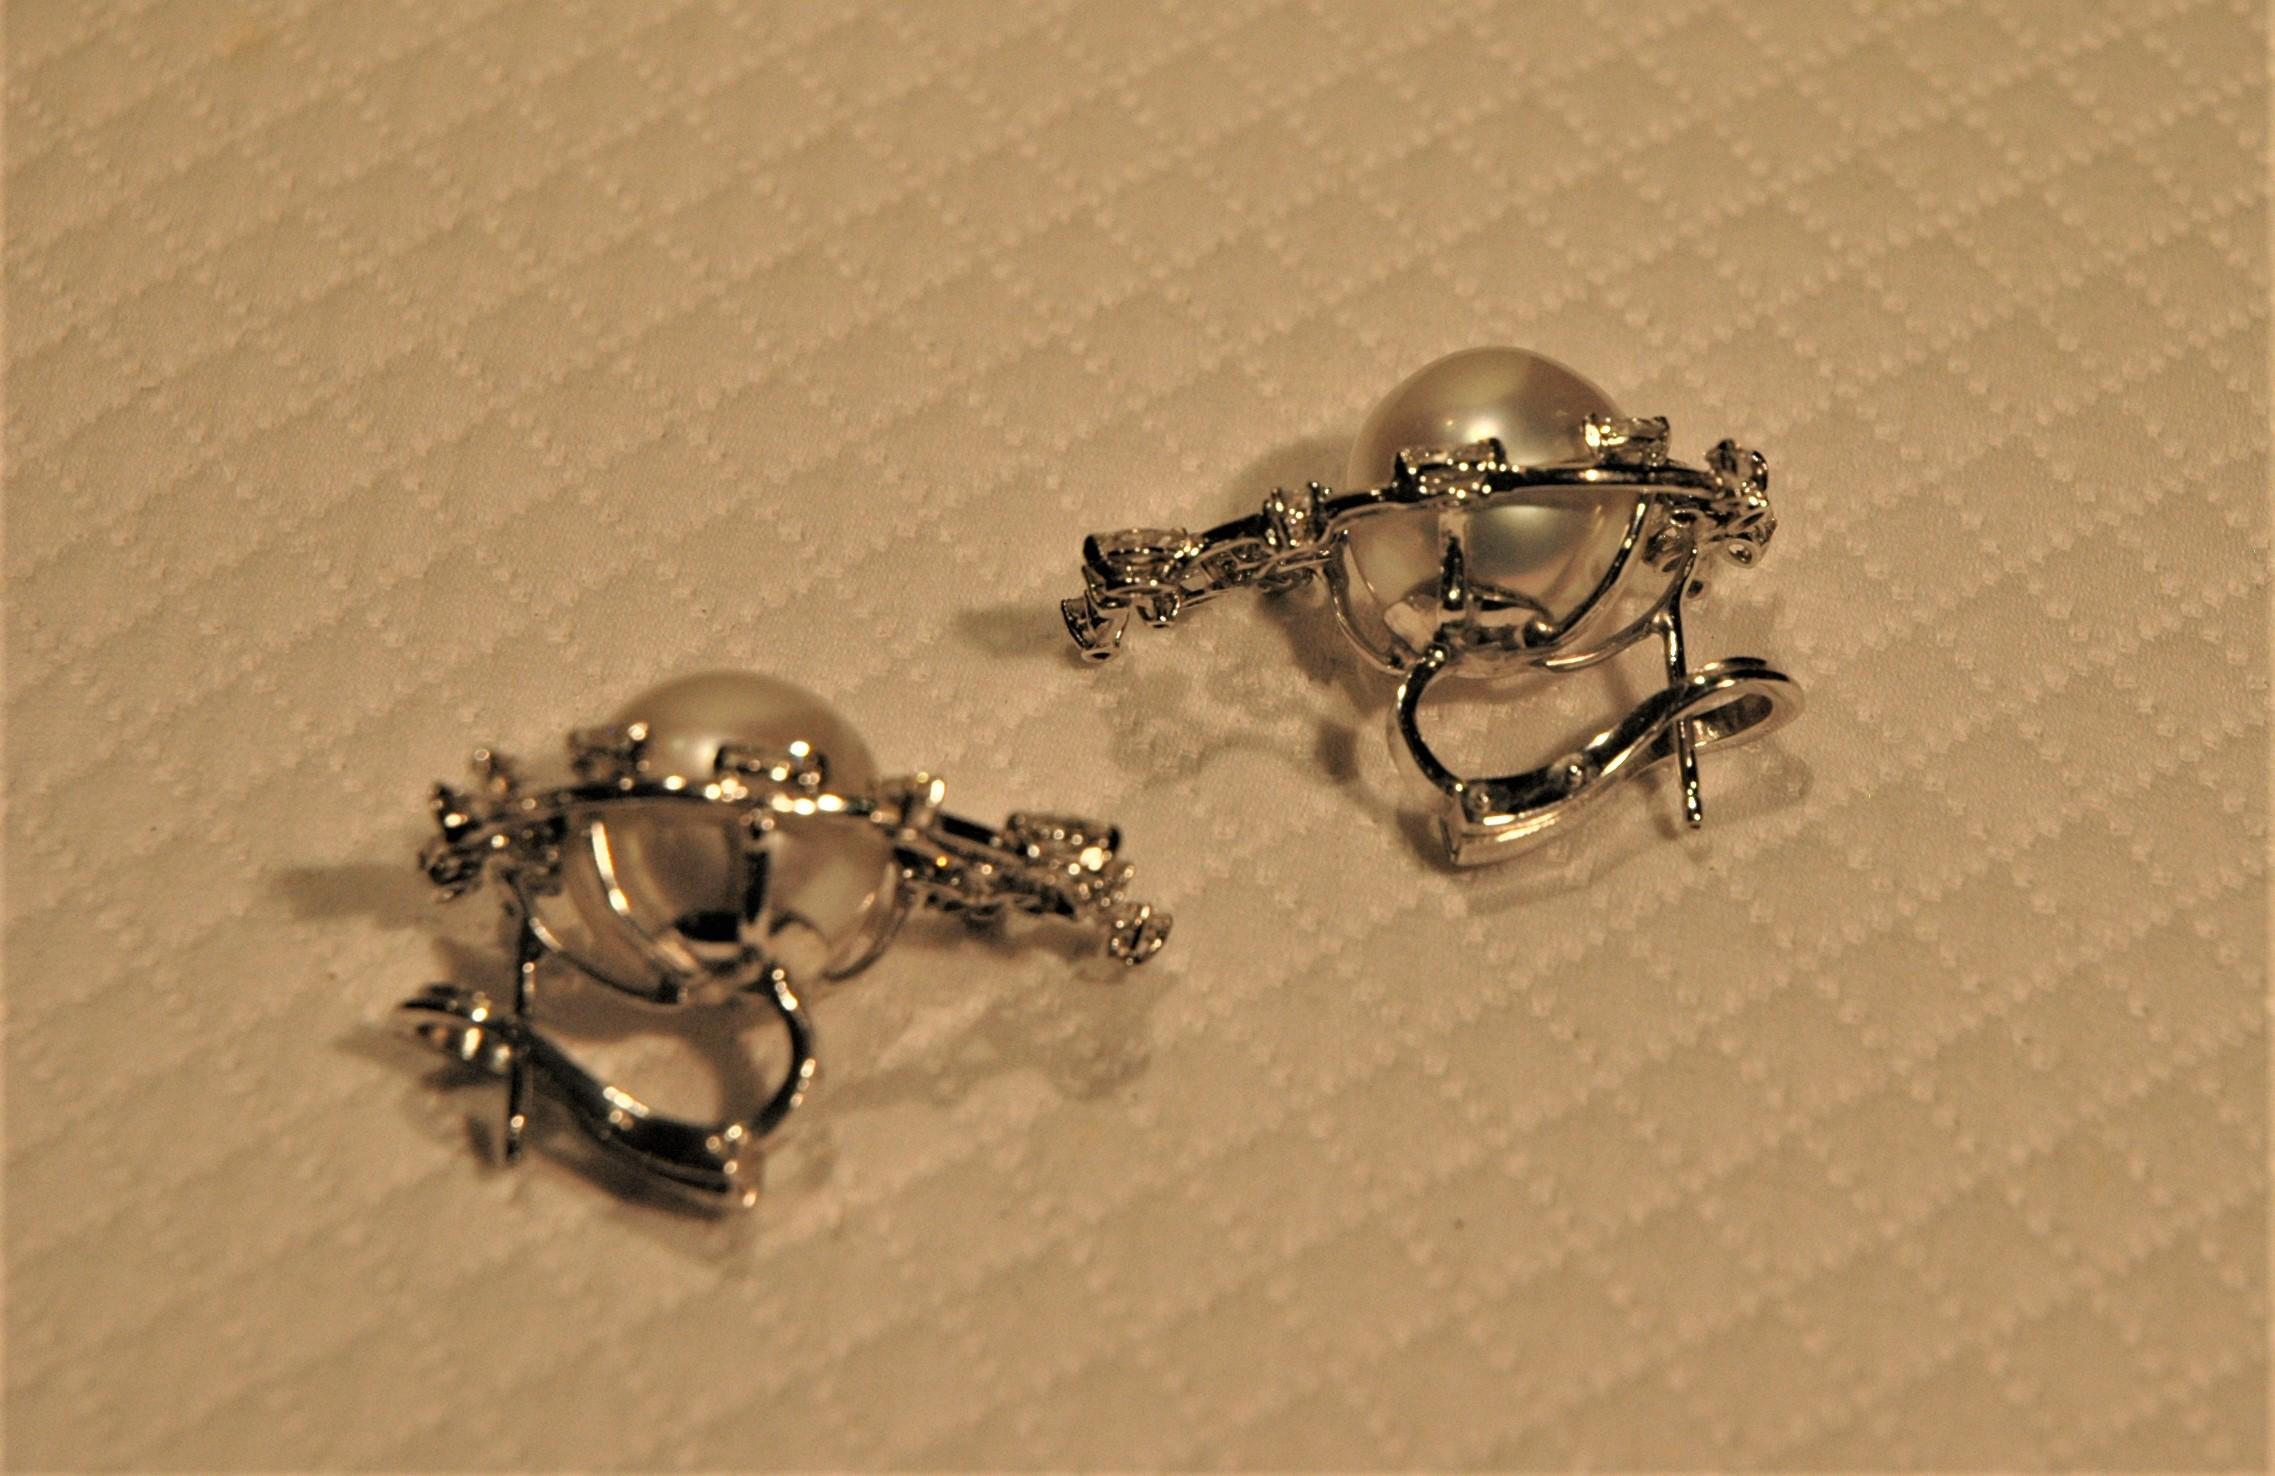 Stud Earrings 18 Kt White Gold, 2.89 Carats Diamonds and White Australian Pearls For Sale 2